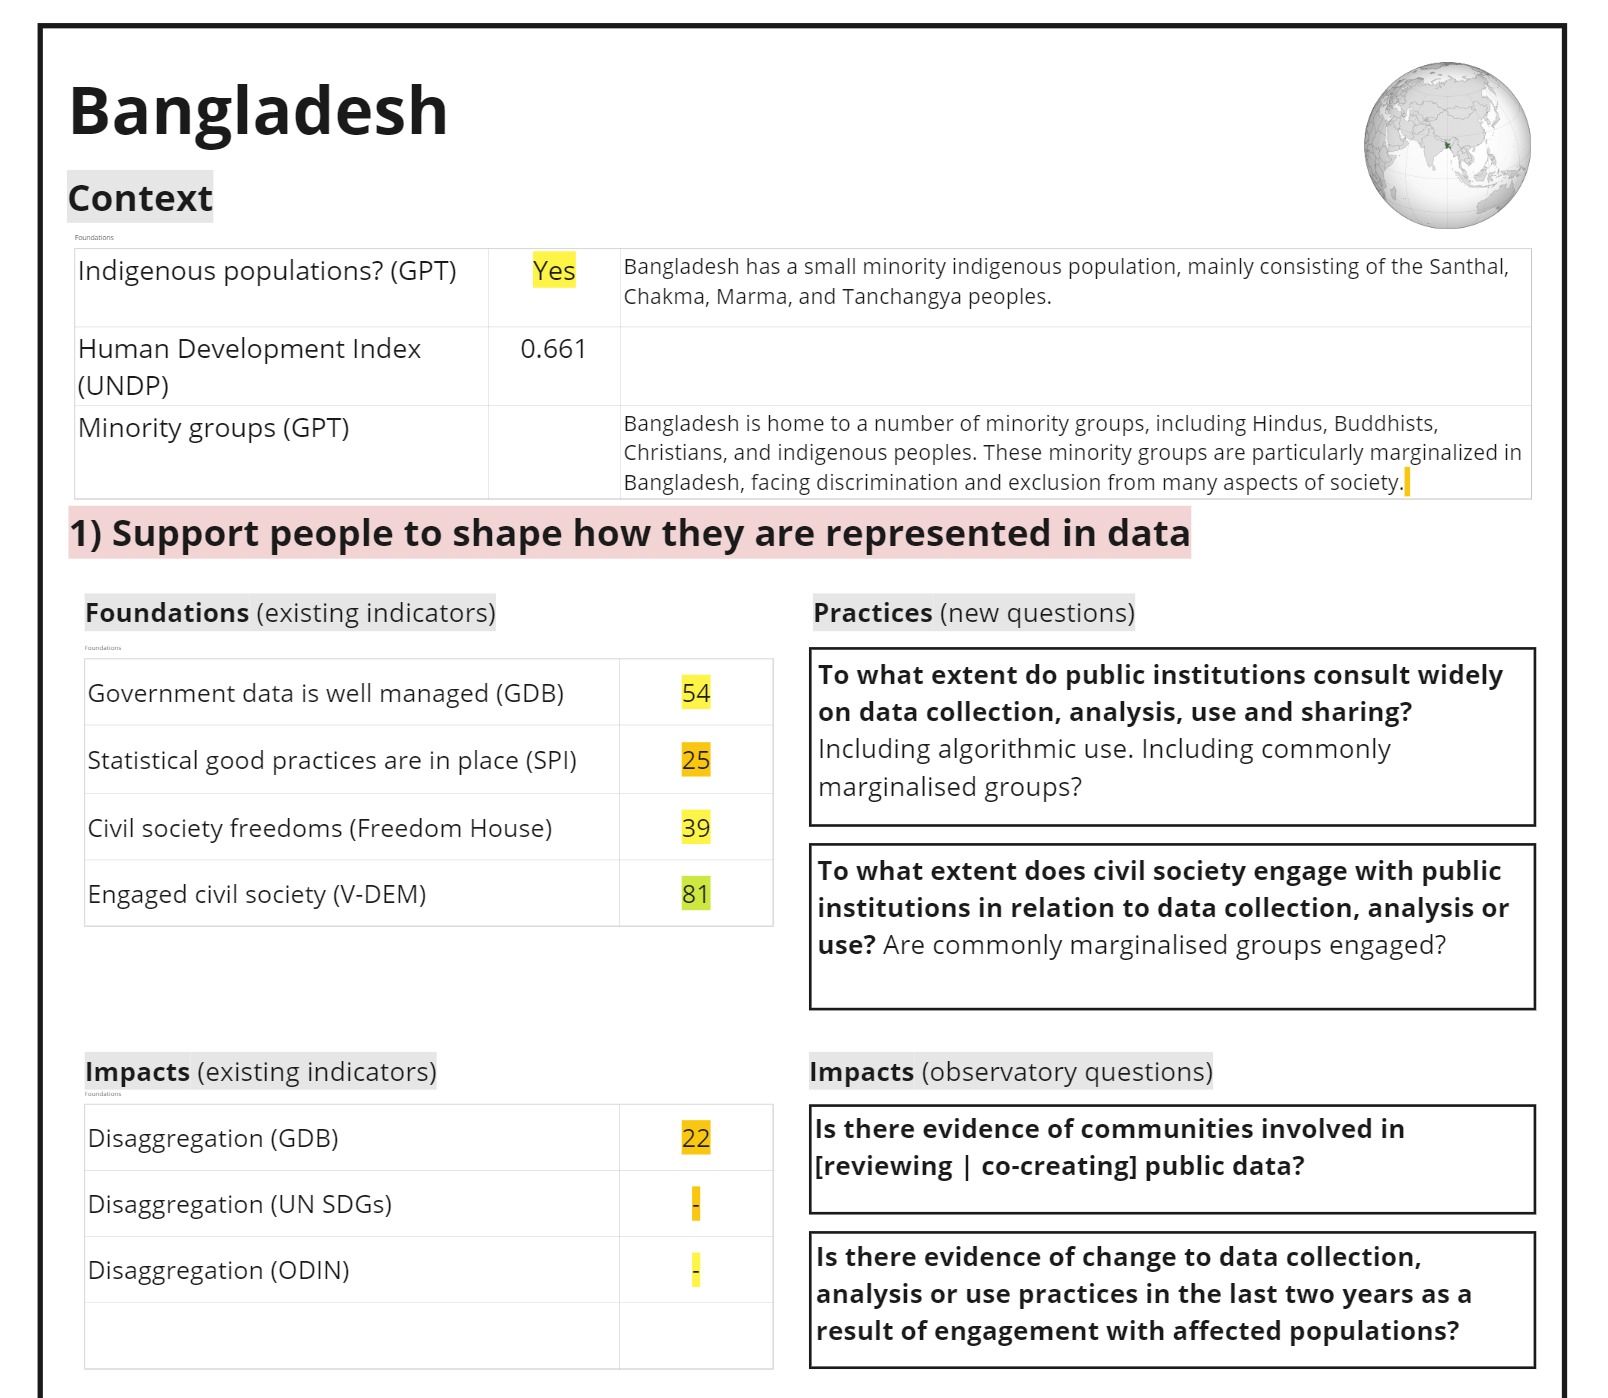 Early mock up of a dashboard for Bangladesh